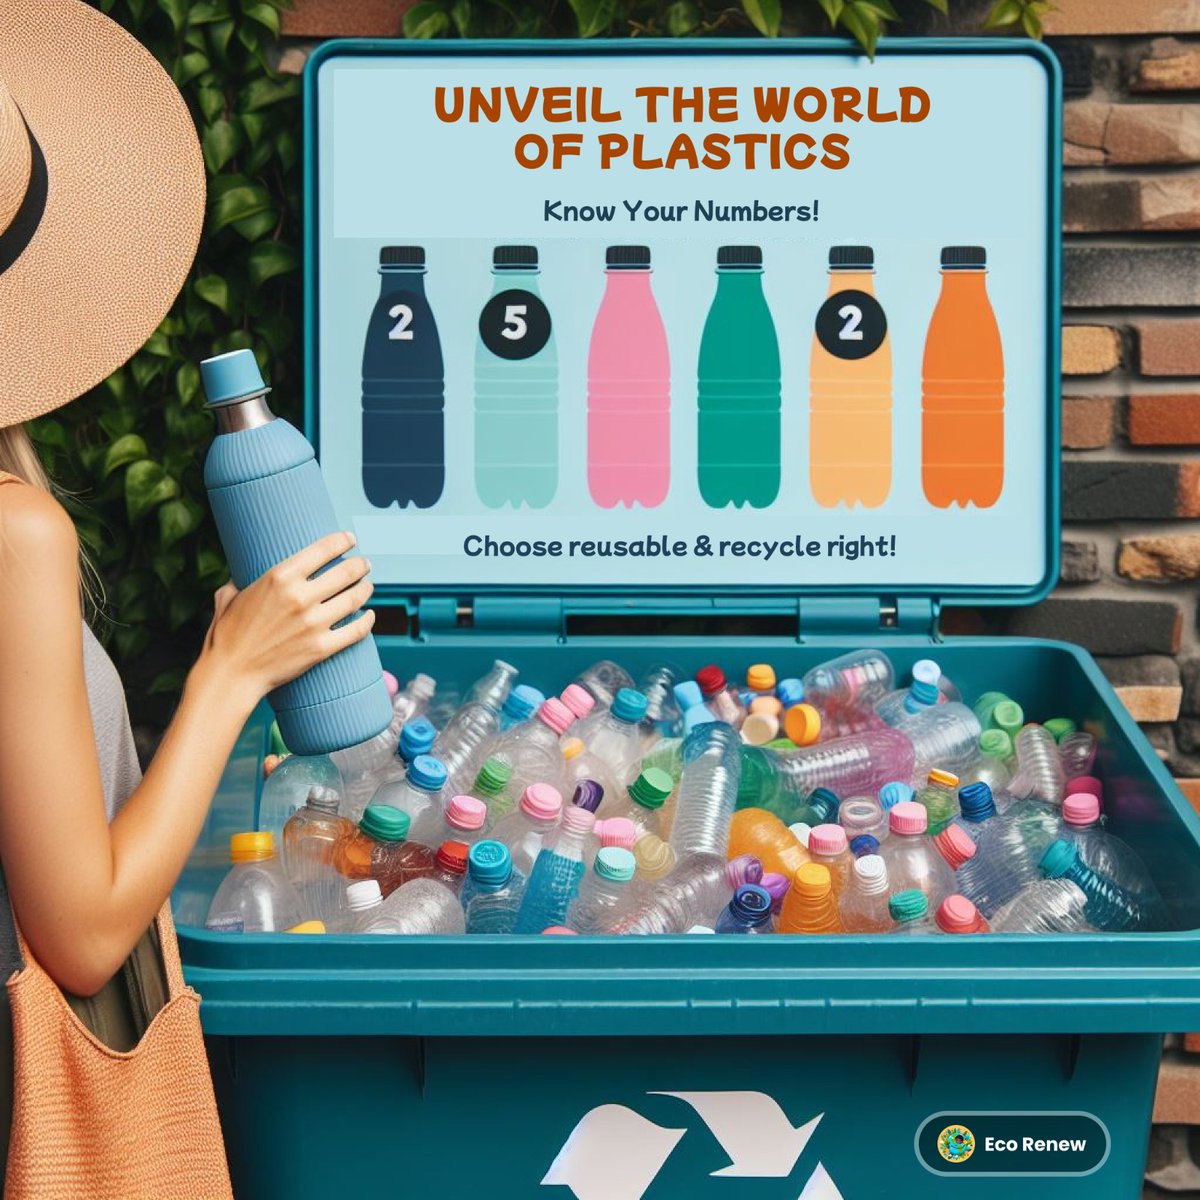 Unveiling the World of Plastics: Know Your Numbers!♻️
🧵A thread on Plastics That Are Safe for You and the Planet.

🌍 #PlasticPollution #EcoAwareness #Ecorenew